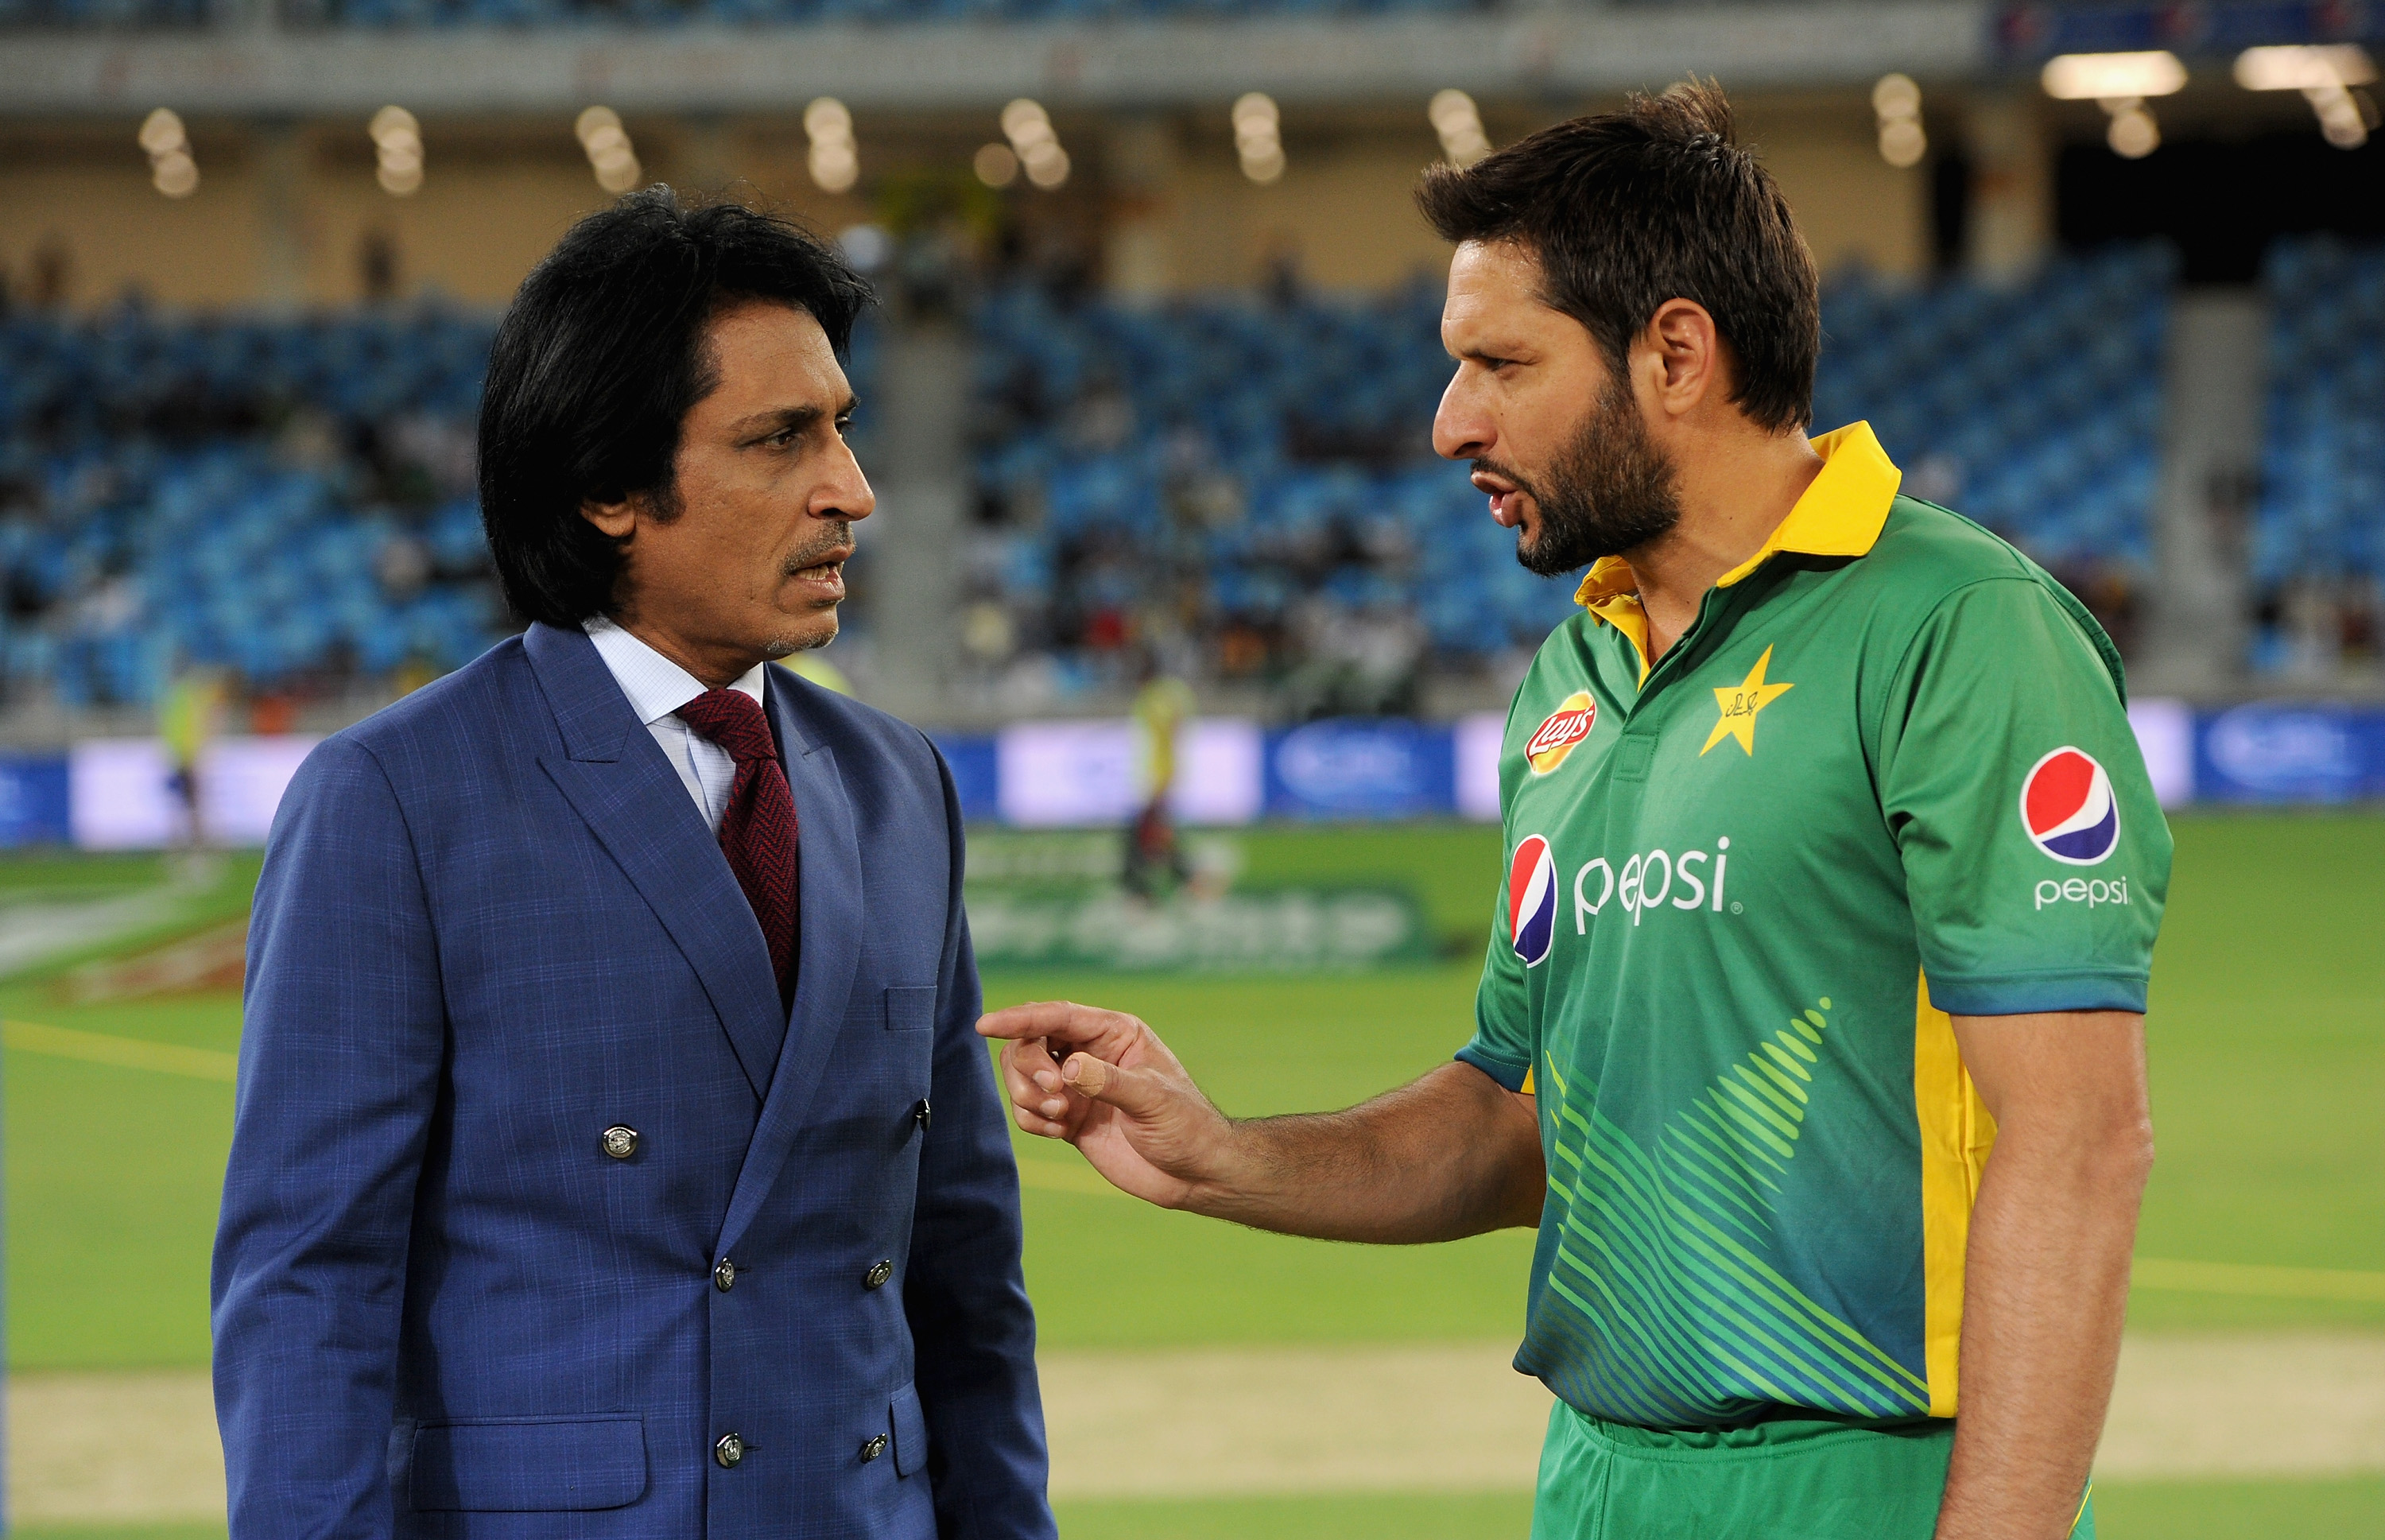 VIDEO | Confused Rameez Raja gives run-out credit to Sarfaraz Ahmed instead of Mohammed Rizwan